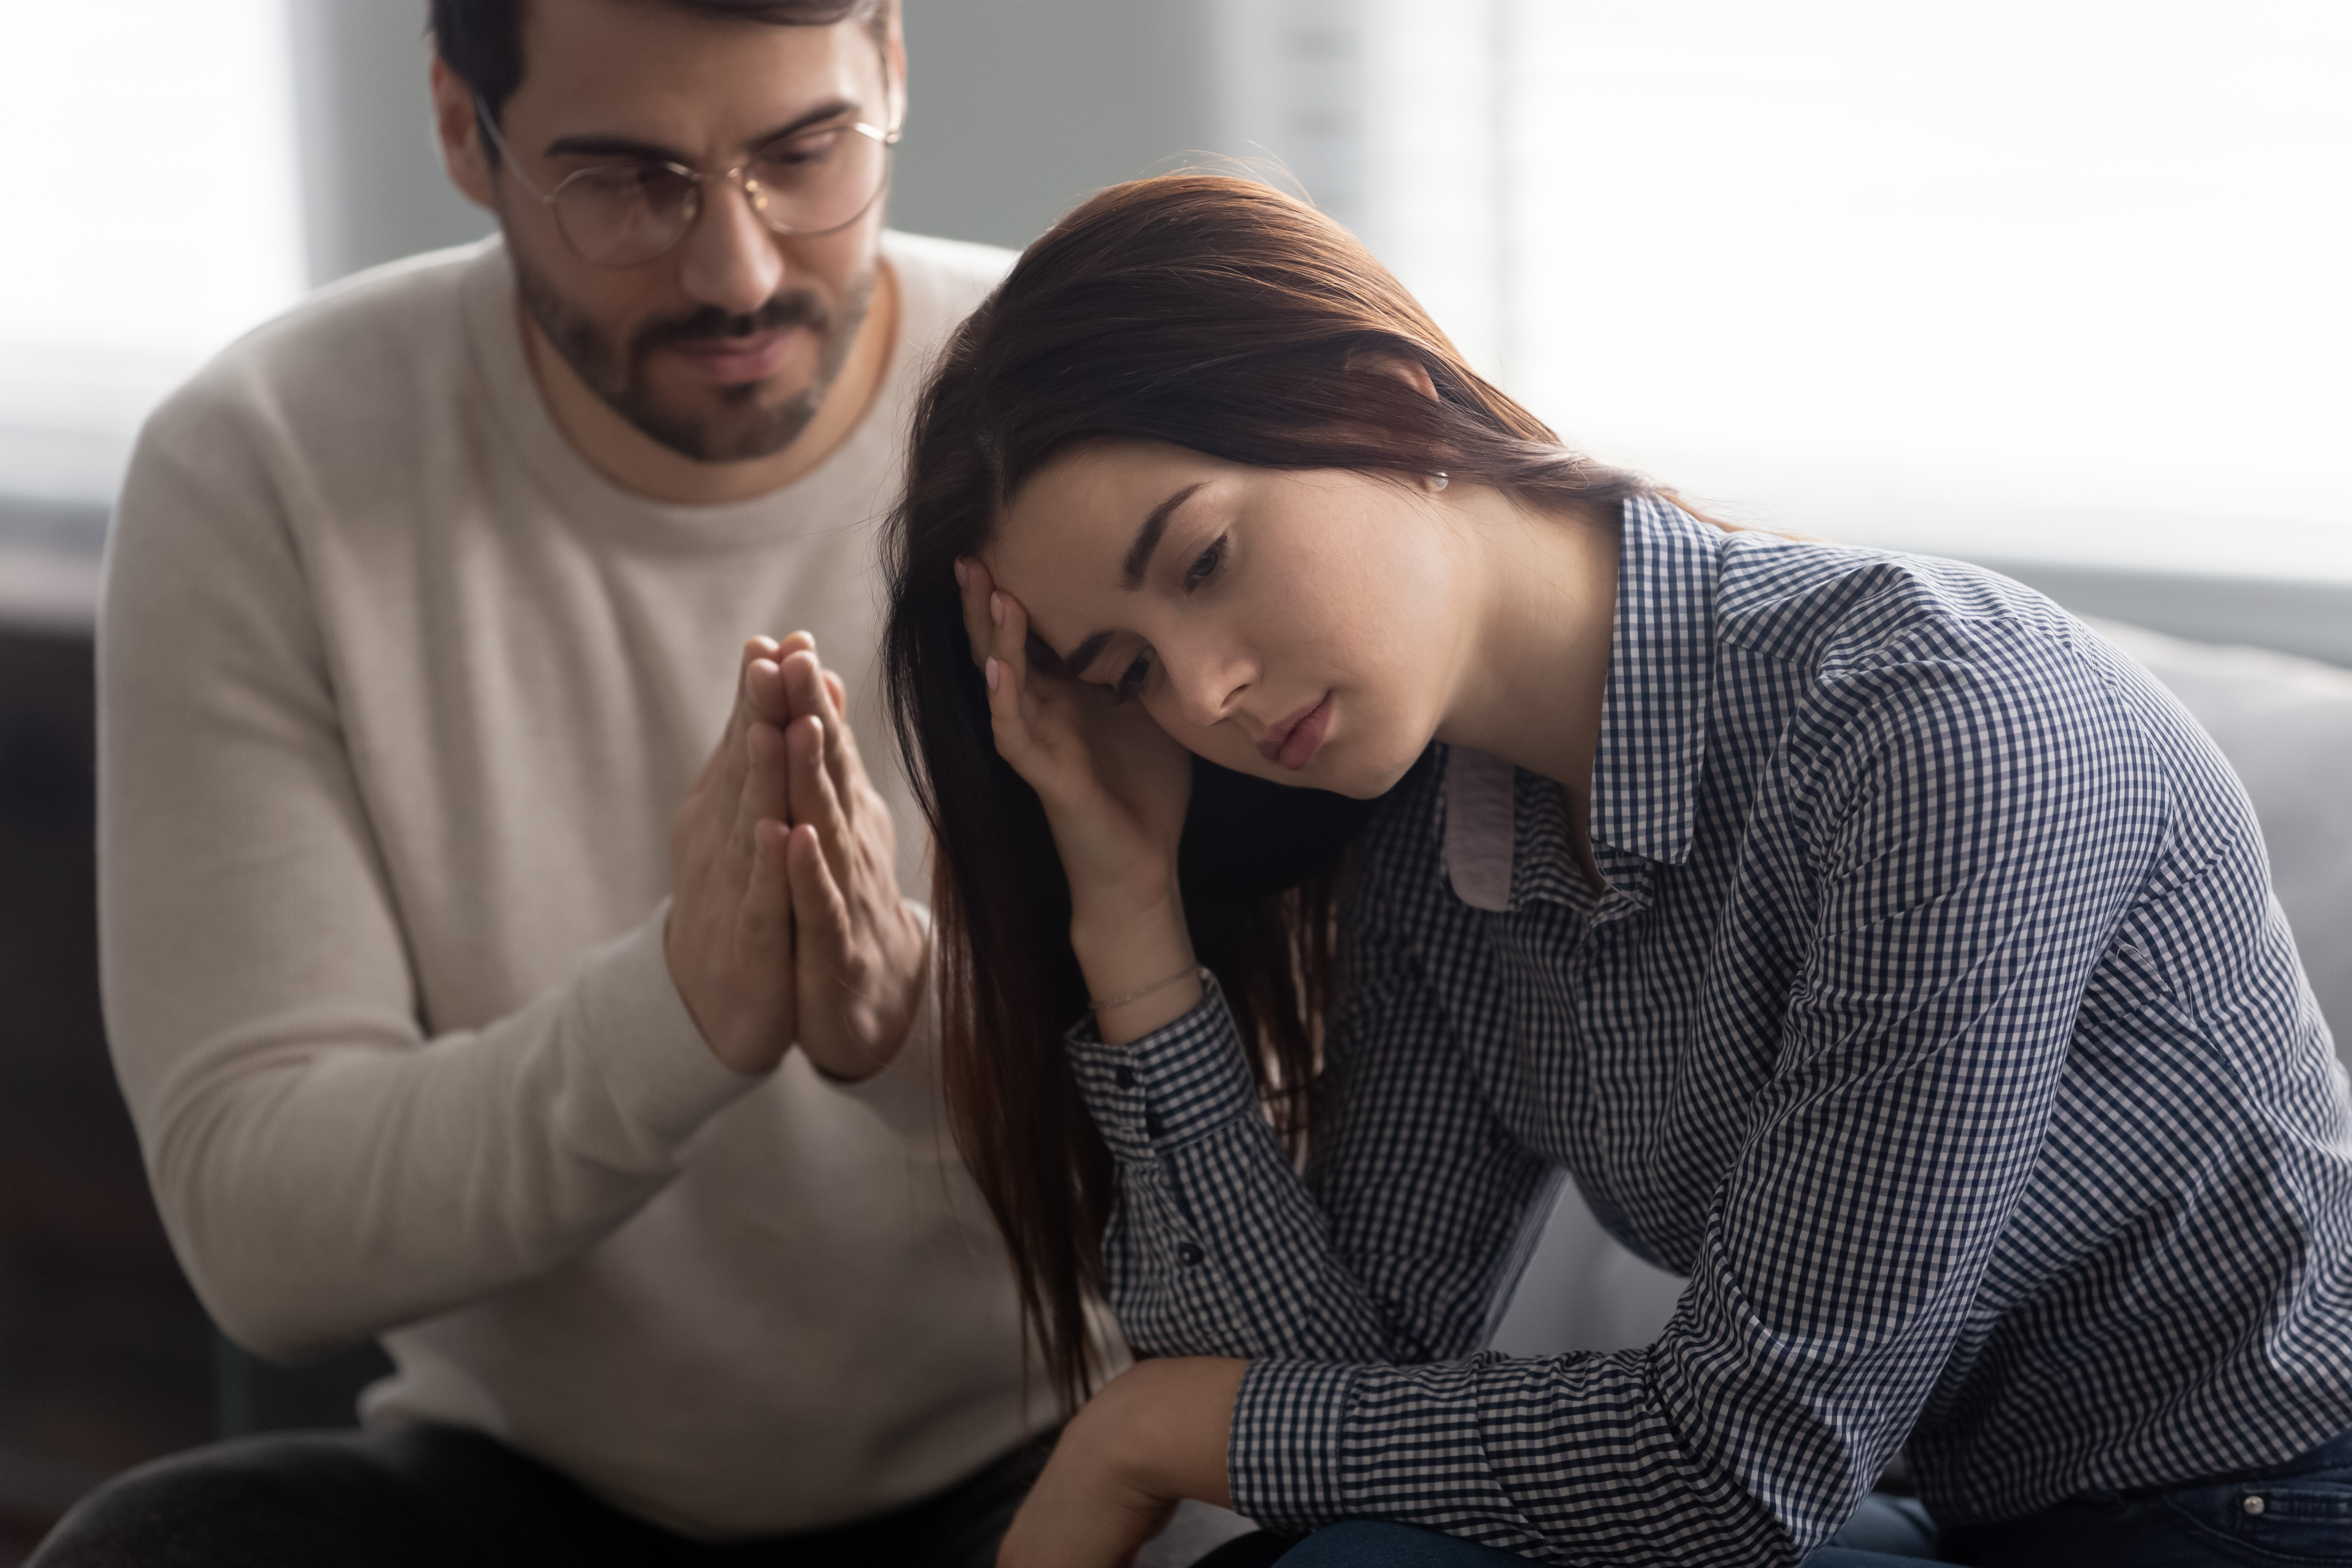 A man apologizing while a woman looks disheartened | Source: Shutterstock